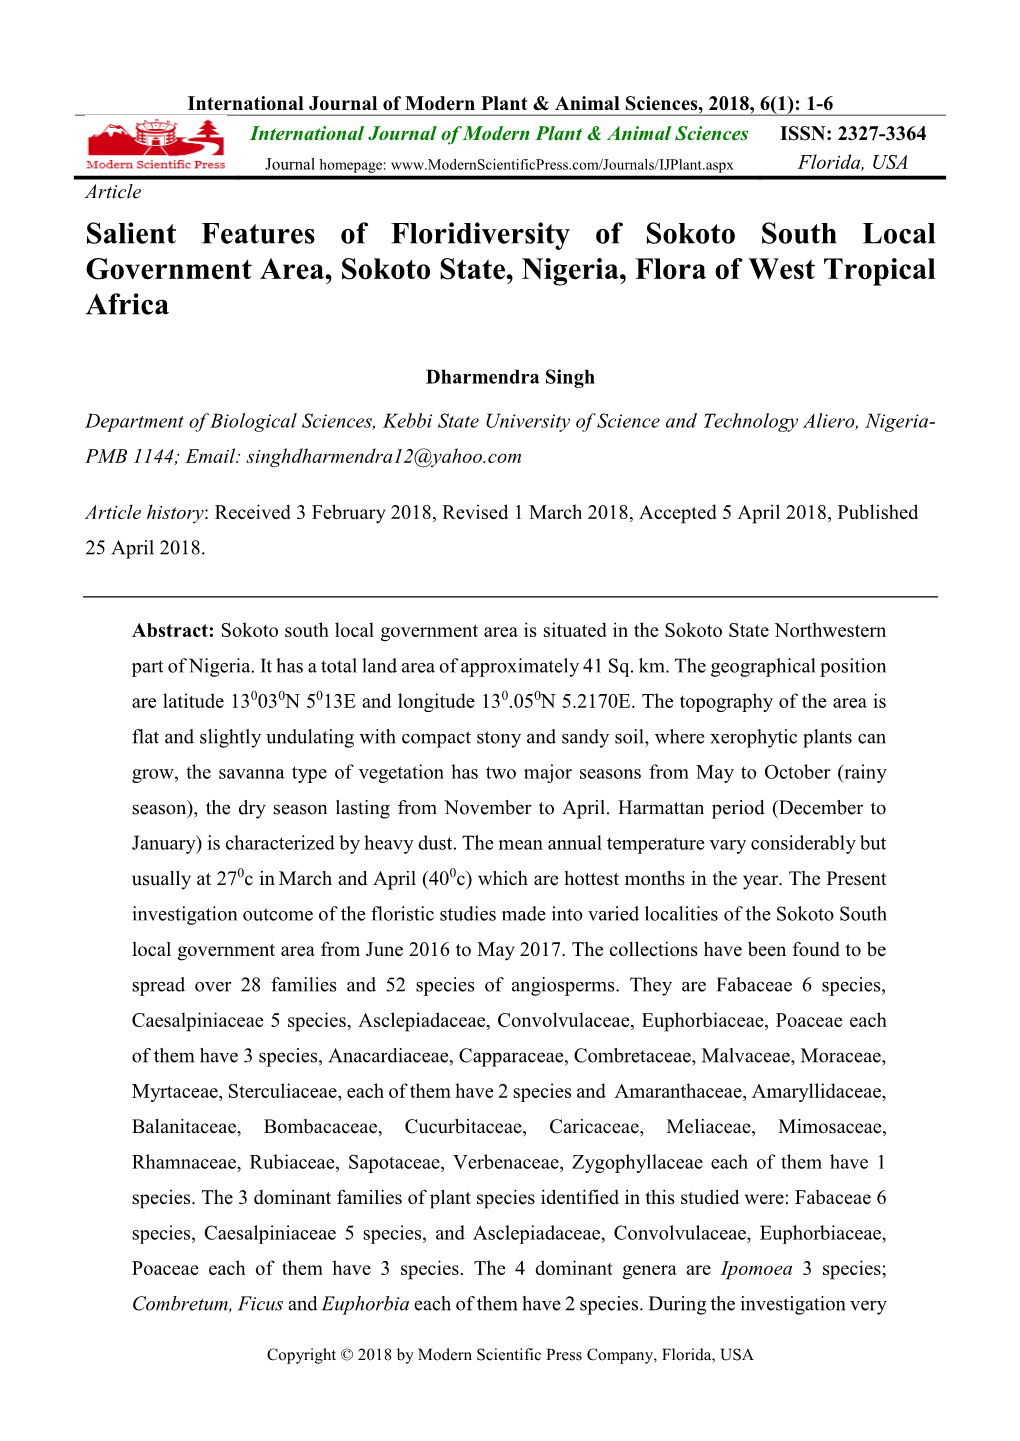 Salient Features of Floridiversity of Sokoto South Local Government Area, Sokoto State, Nigeria, Flora of West Tropical Africa